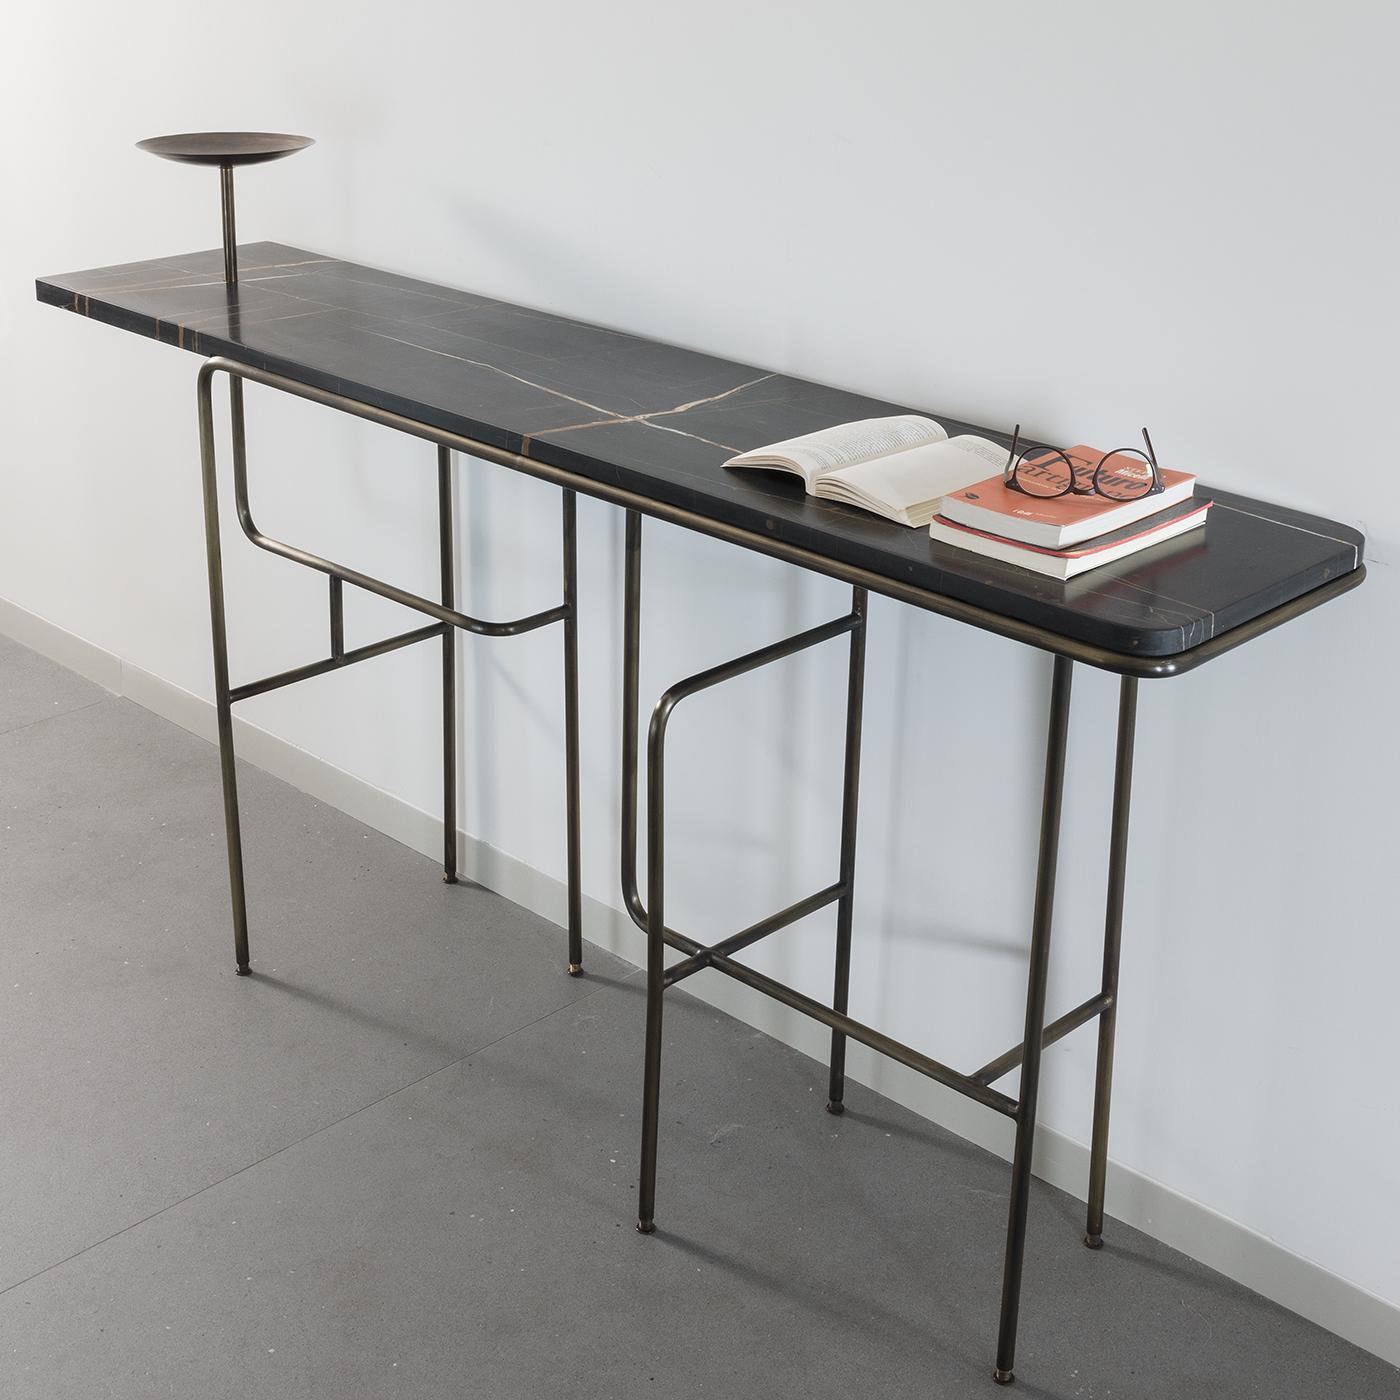 Characterized by an intricate Industrial style, the Guinea console table by Alberto Guarriello is a stylish and functional table that combines a sturdy and solid marble top with an interwoven support structure of burnished brass tubing providing a